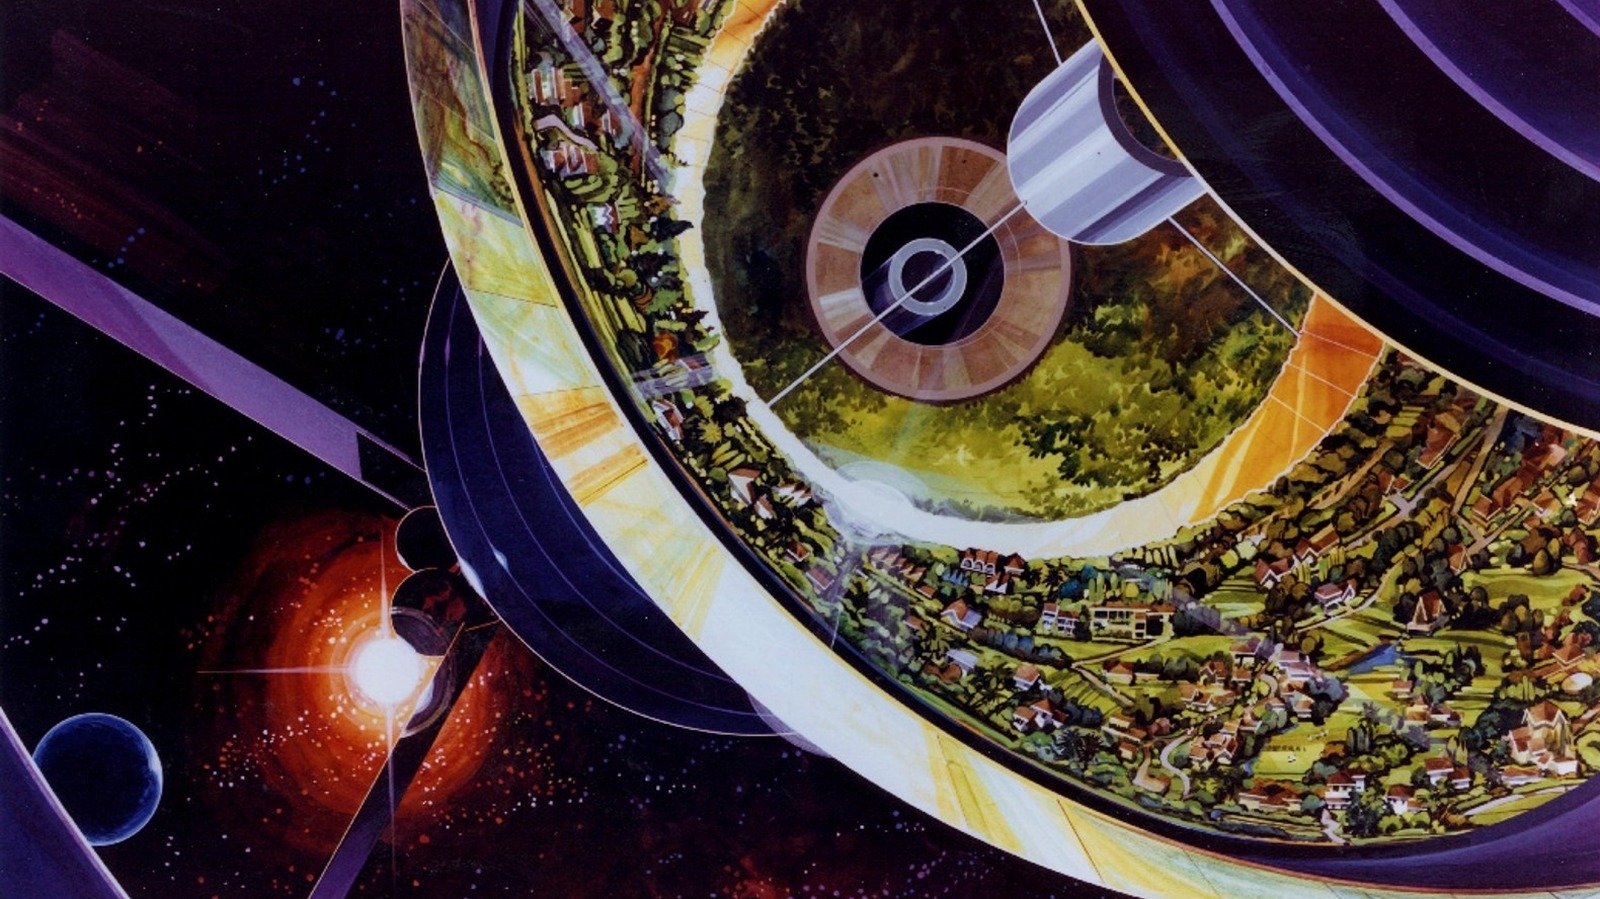 Here's What NASA's Vision For The Future Looked Like In 1975